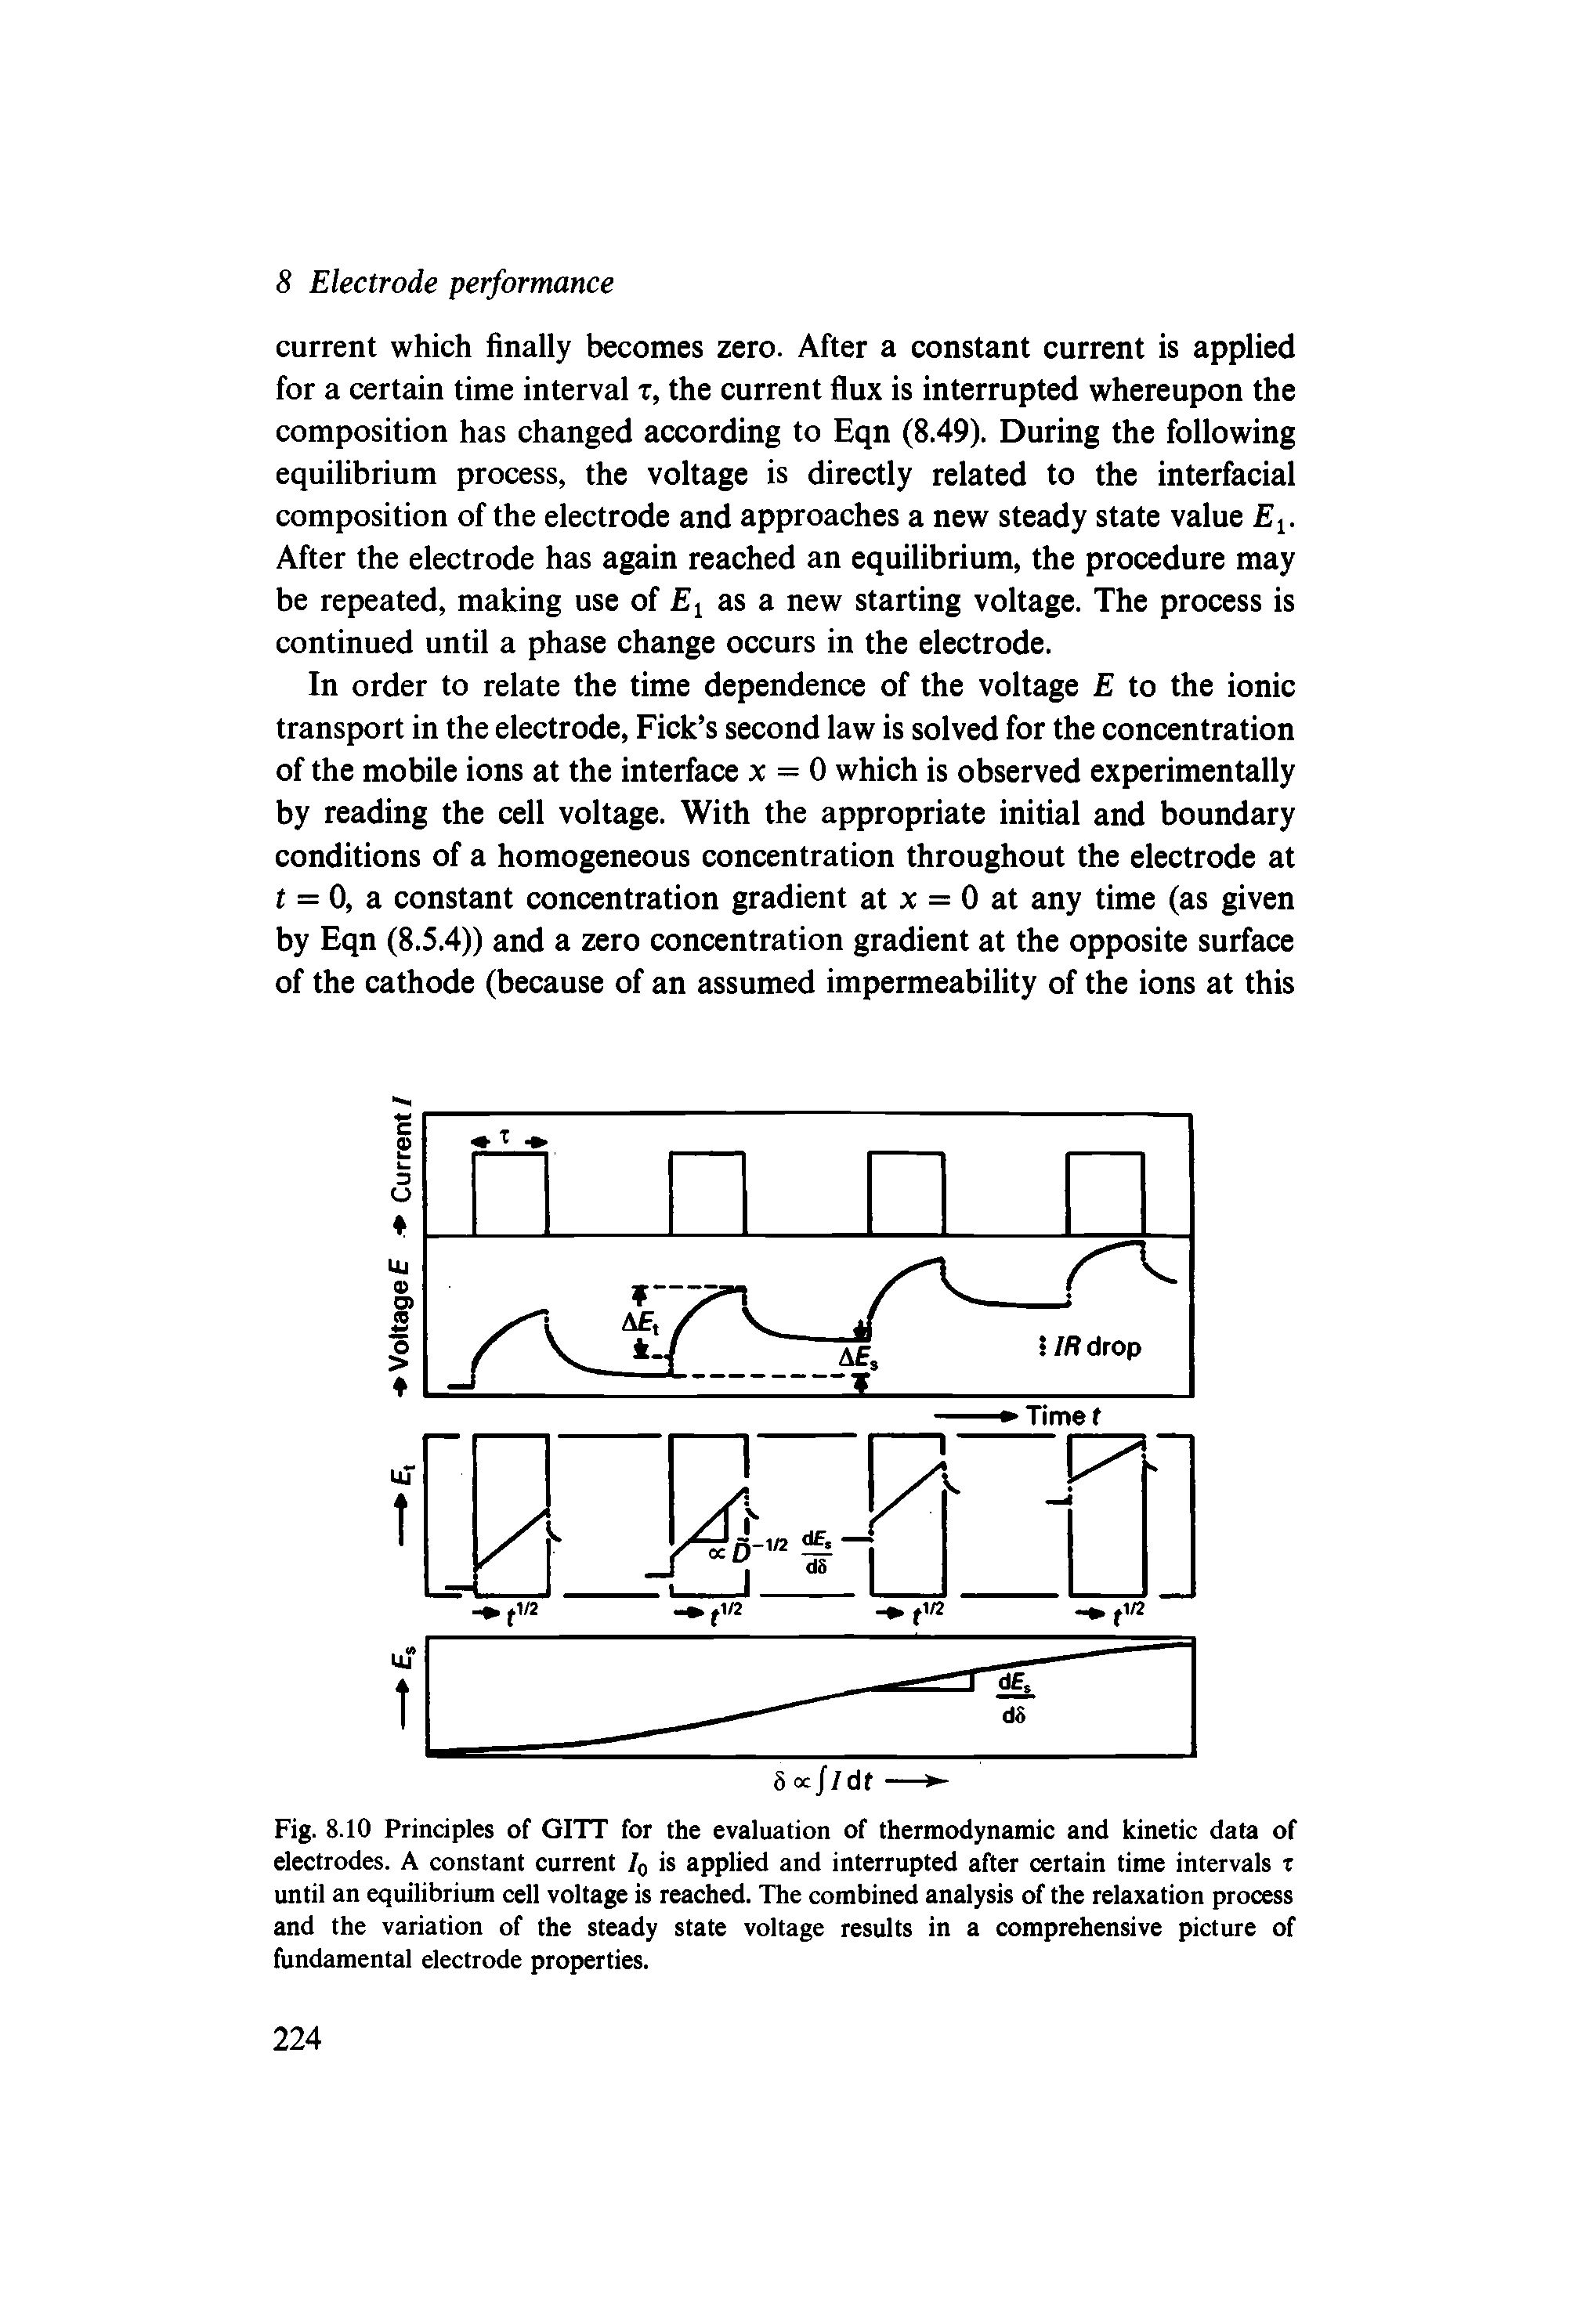 Fig. 8.10 Principles of GITT for the evaluation of thermodynamic and kinetic data of electrodes. A constant current Iq is applied and interrupted after certain time intervals t until an equilibrium cell voltage is reached. The combined analysis of the relaxation process and the variation of the steady state voltage results in a comprehensive picture of fundamental electrode properties.